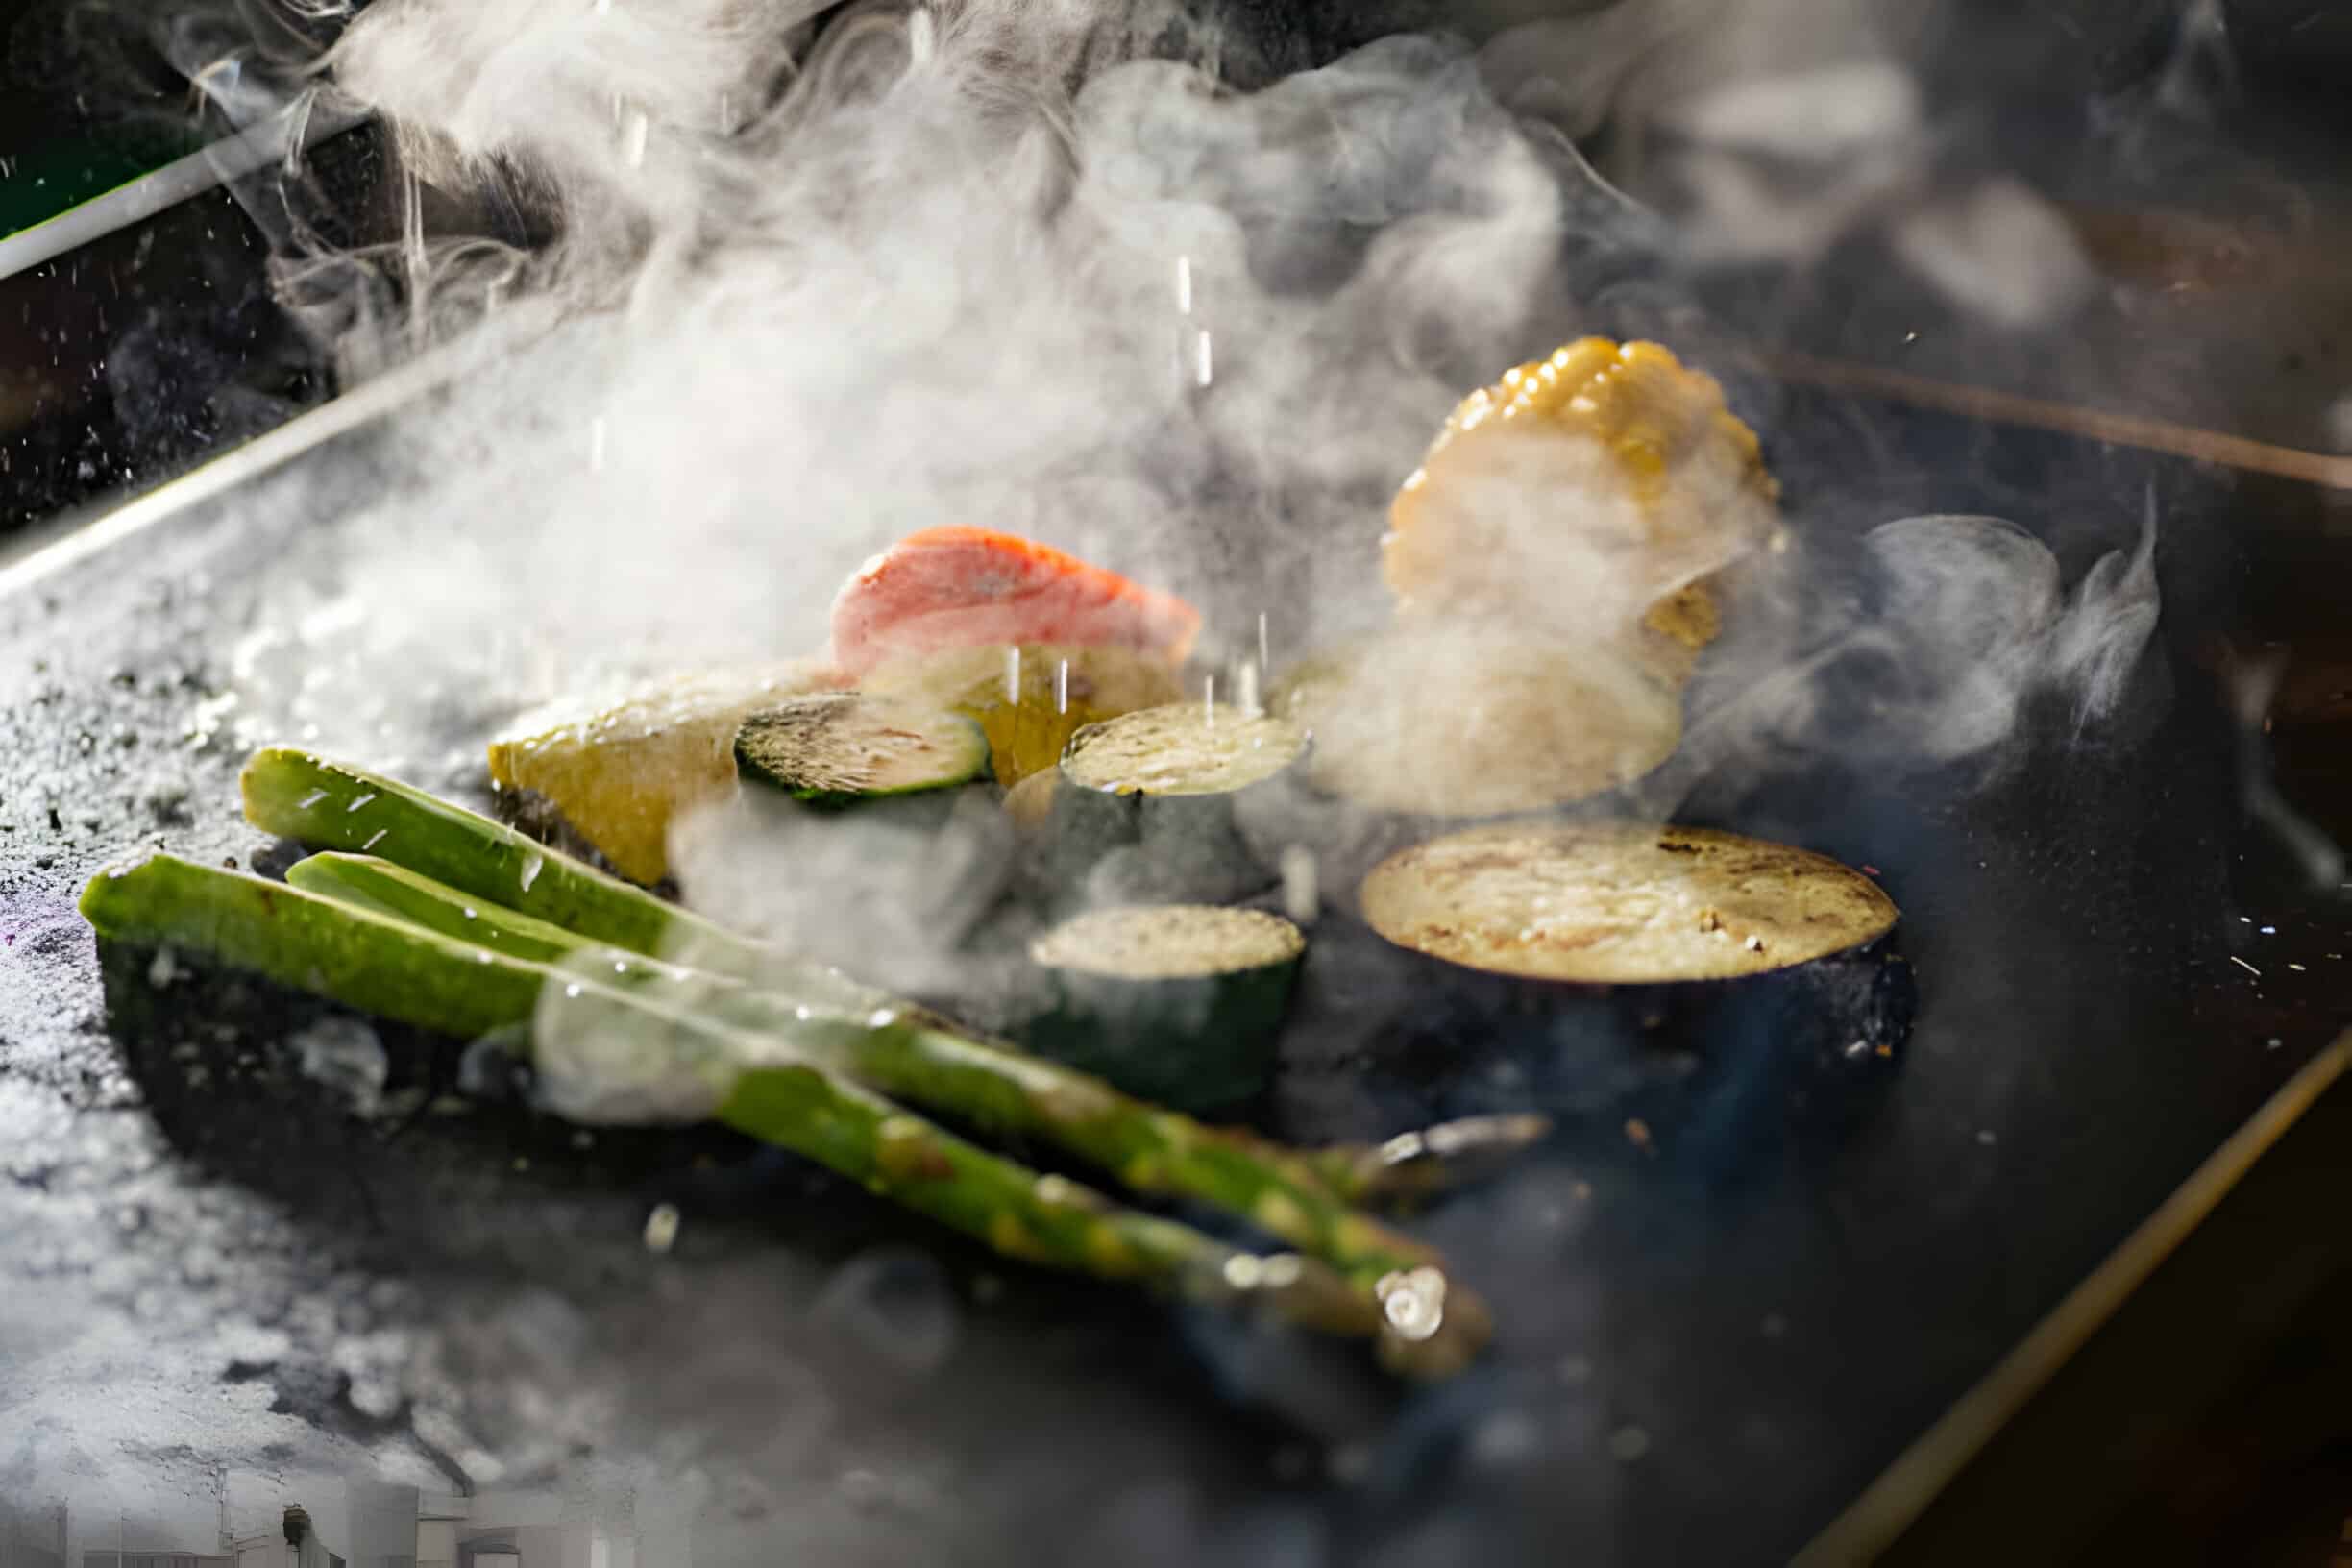 How to Clean a Blackstone Griddle Tidyhere  Image of Asparagus, Courgettes, Paprika and Corn Cooked on a Hot Griddle